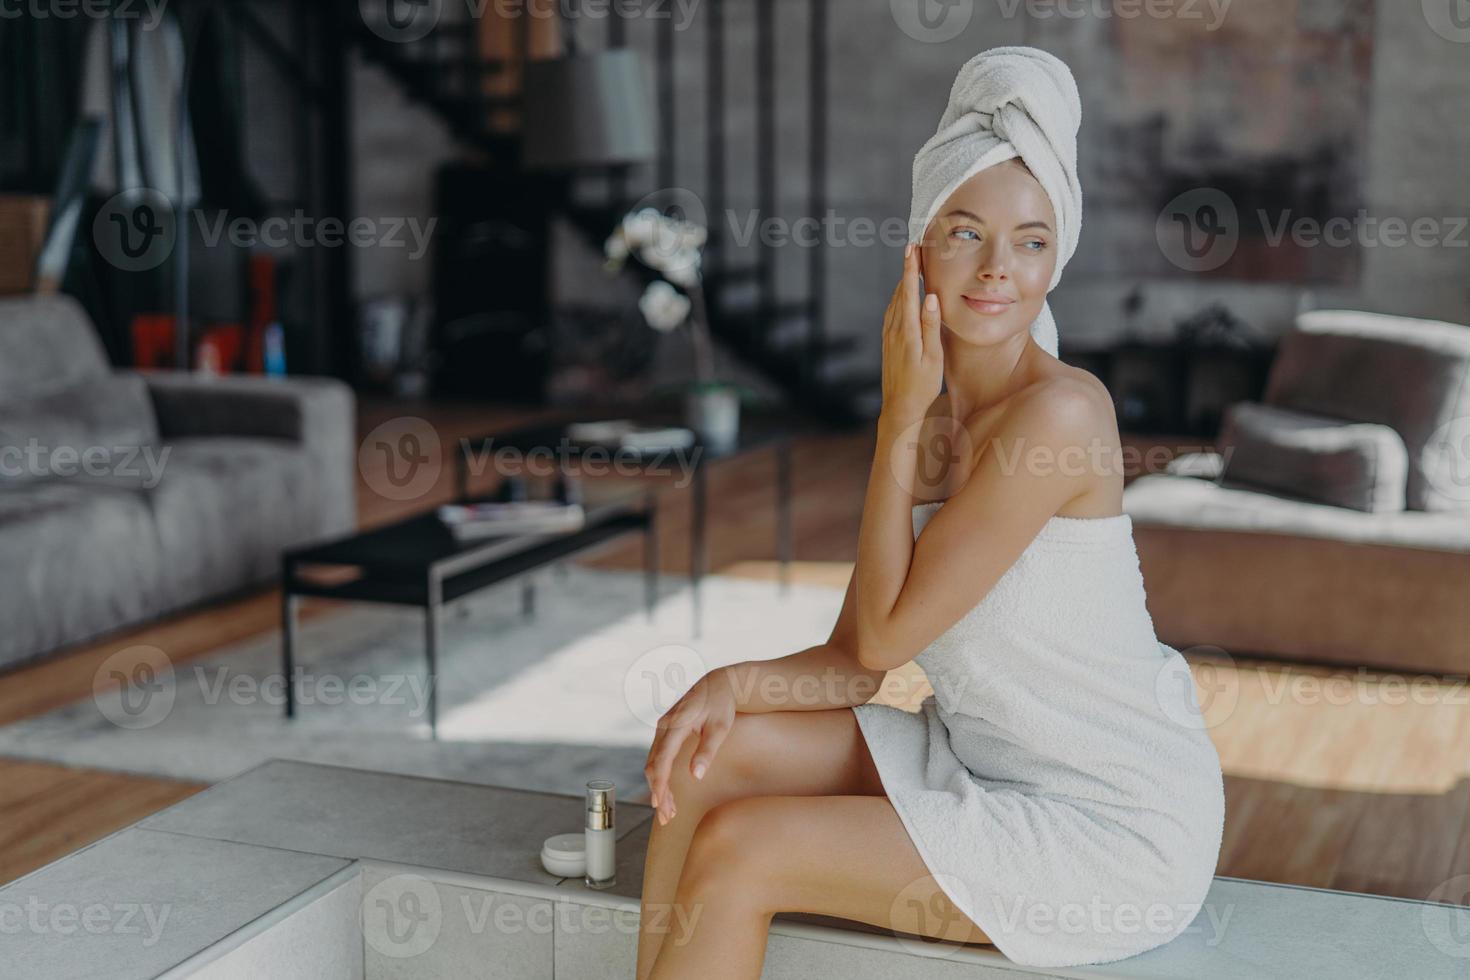 Women, cosmetology, beauty and hygiene concept. Relaxed thoughtful woman wrapped in bath towel, applies anti wrinkle cream or body lotion, poses in living room at home, looks pensively right photo